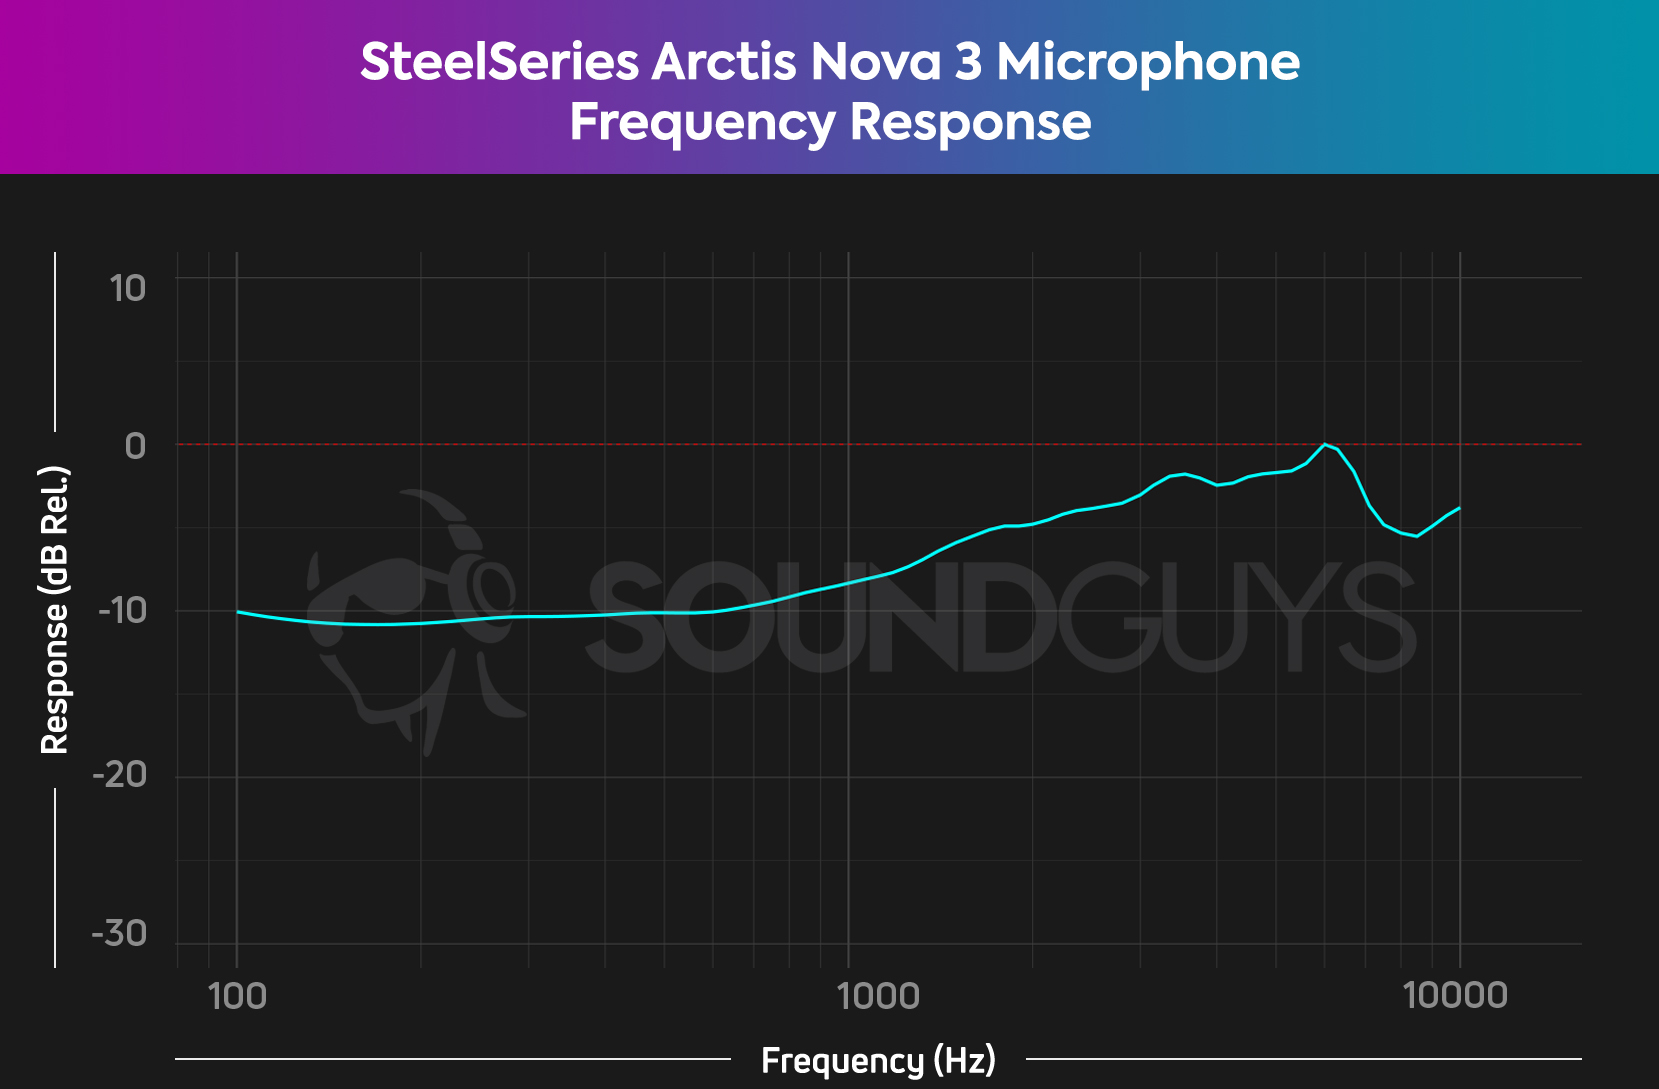 The SteelSeries Arctis Nova 3 microphone frequency response chart.